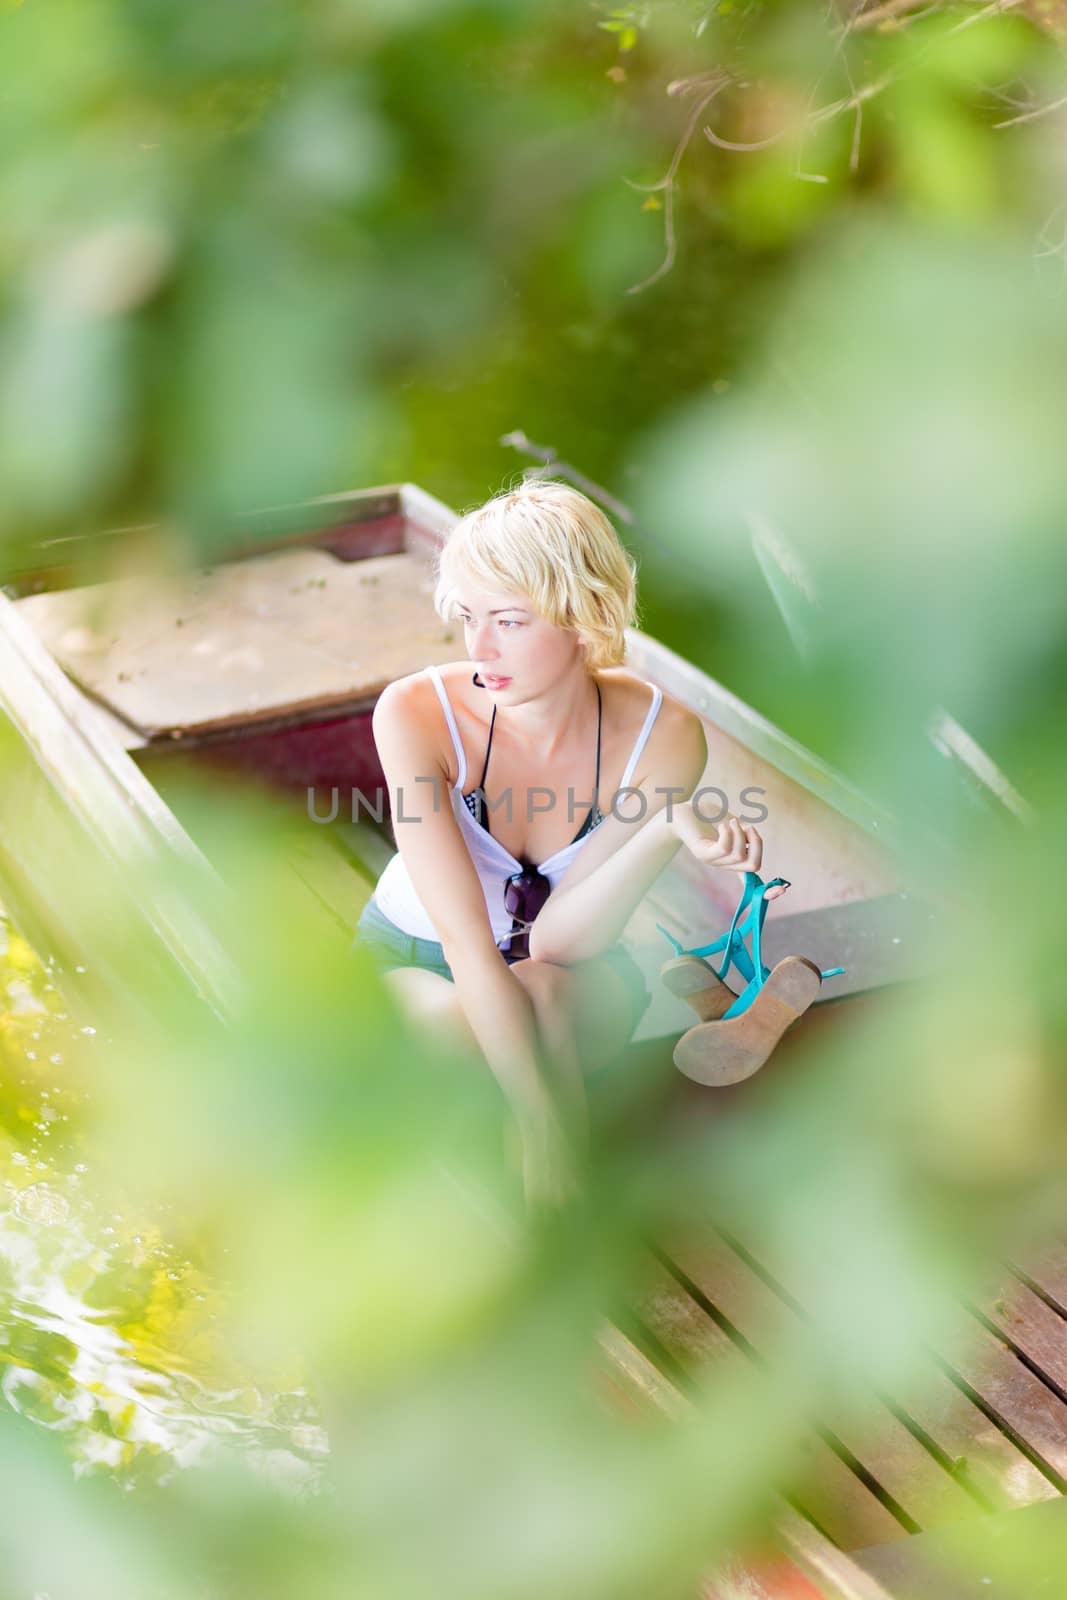 Thoughtful young blonde woman enjoying the sunny summer day on a vintage wooden boat on a lake in pure natural environment  being secretly observed through the branches.